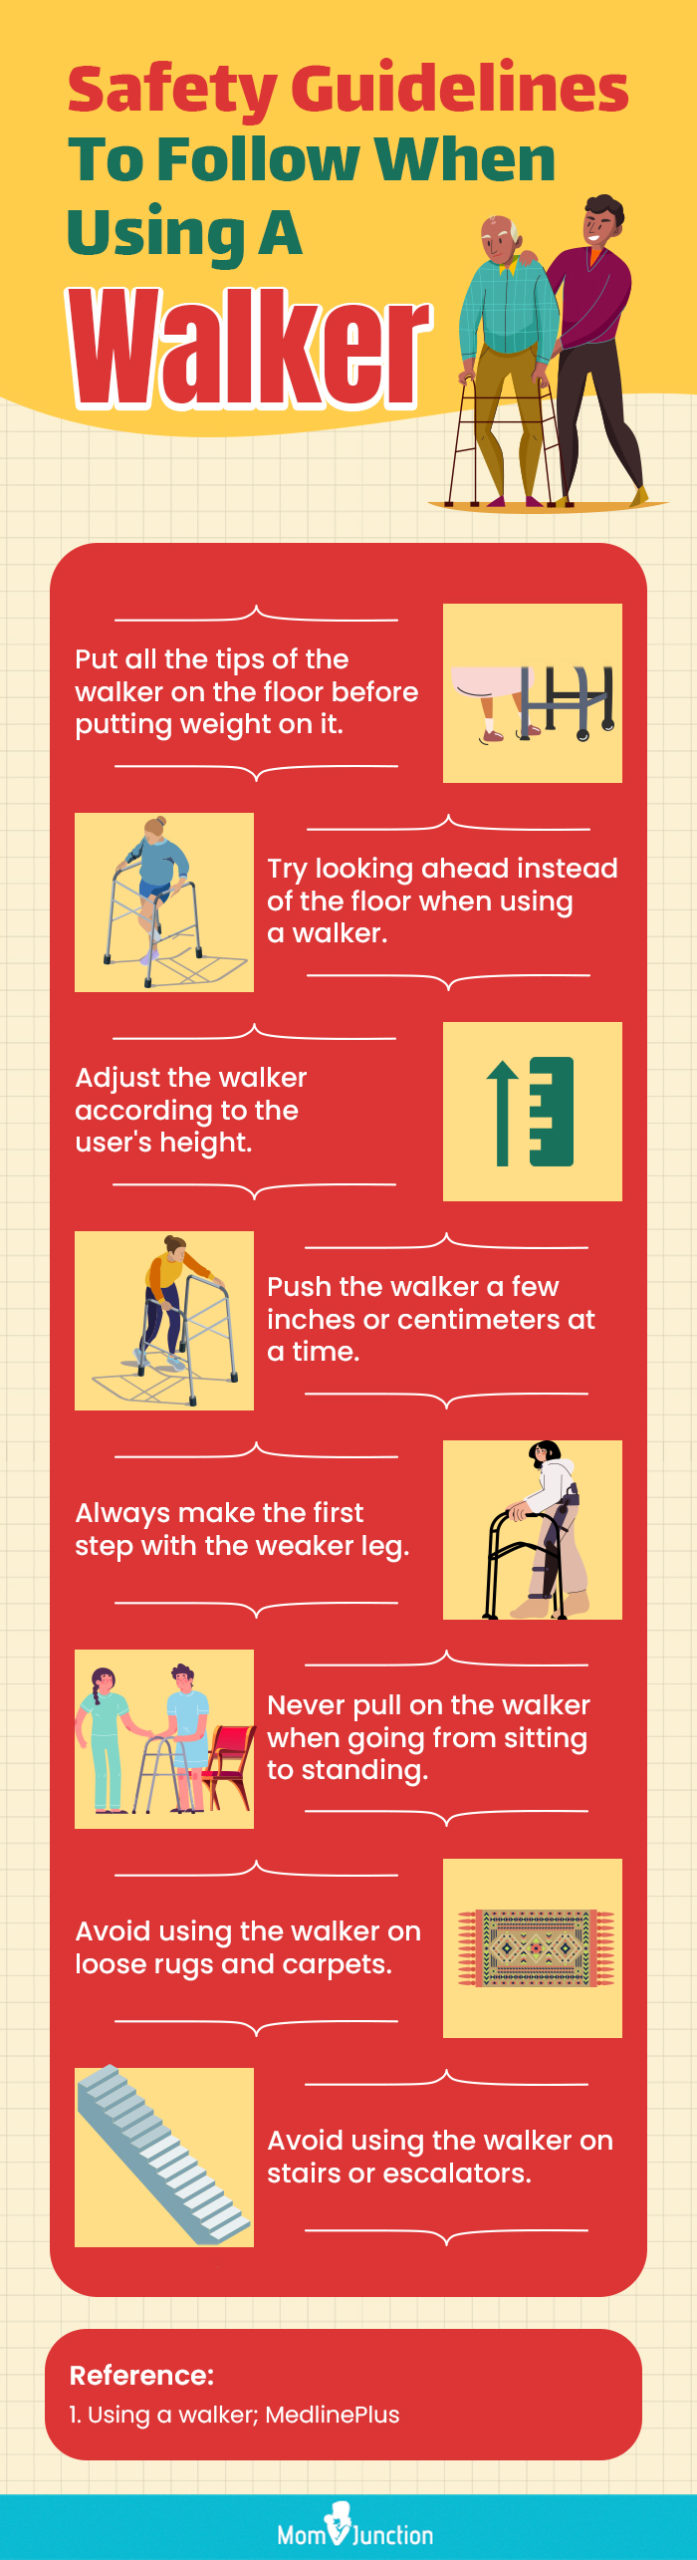 Safety Guidelines To Follow When Using A Walker